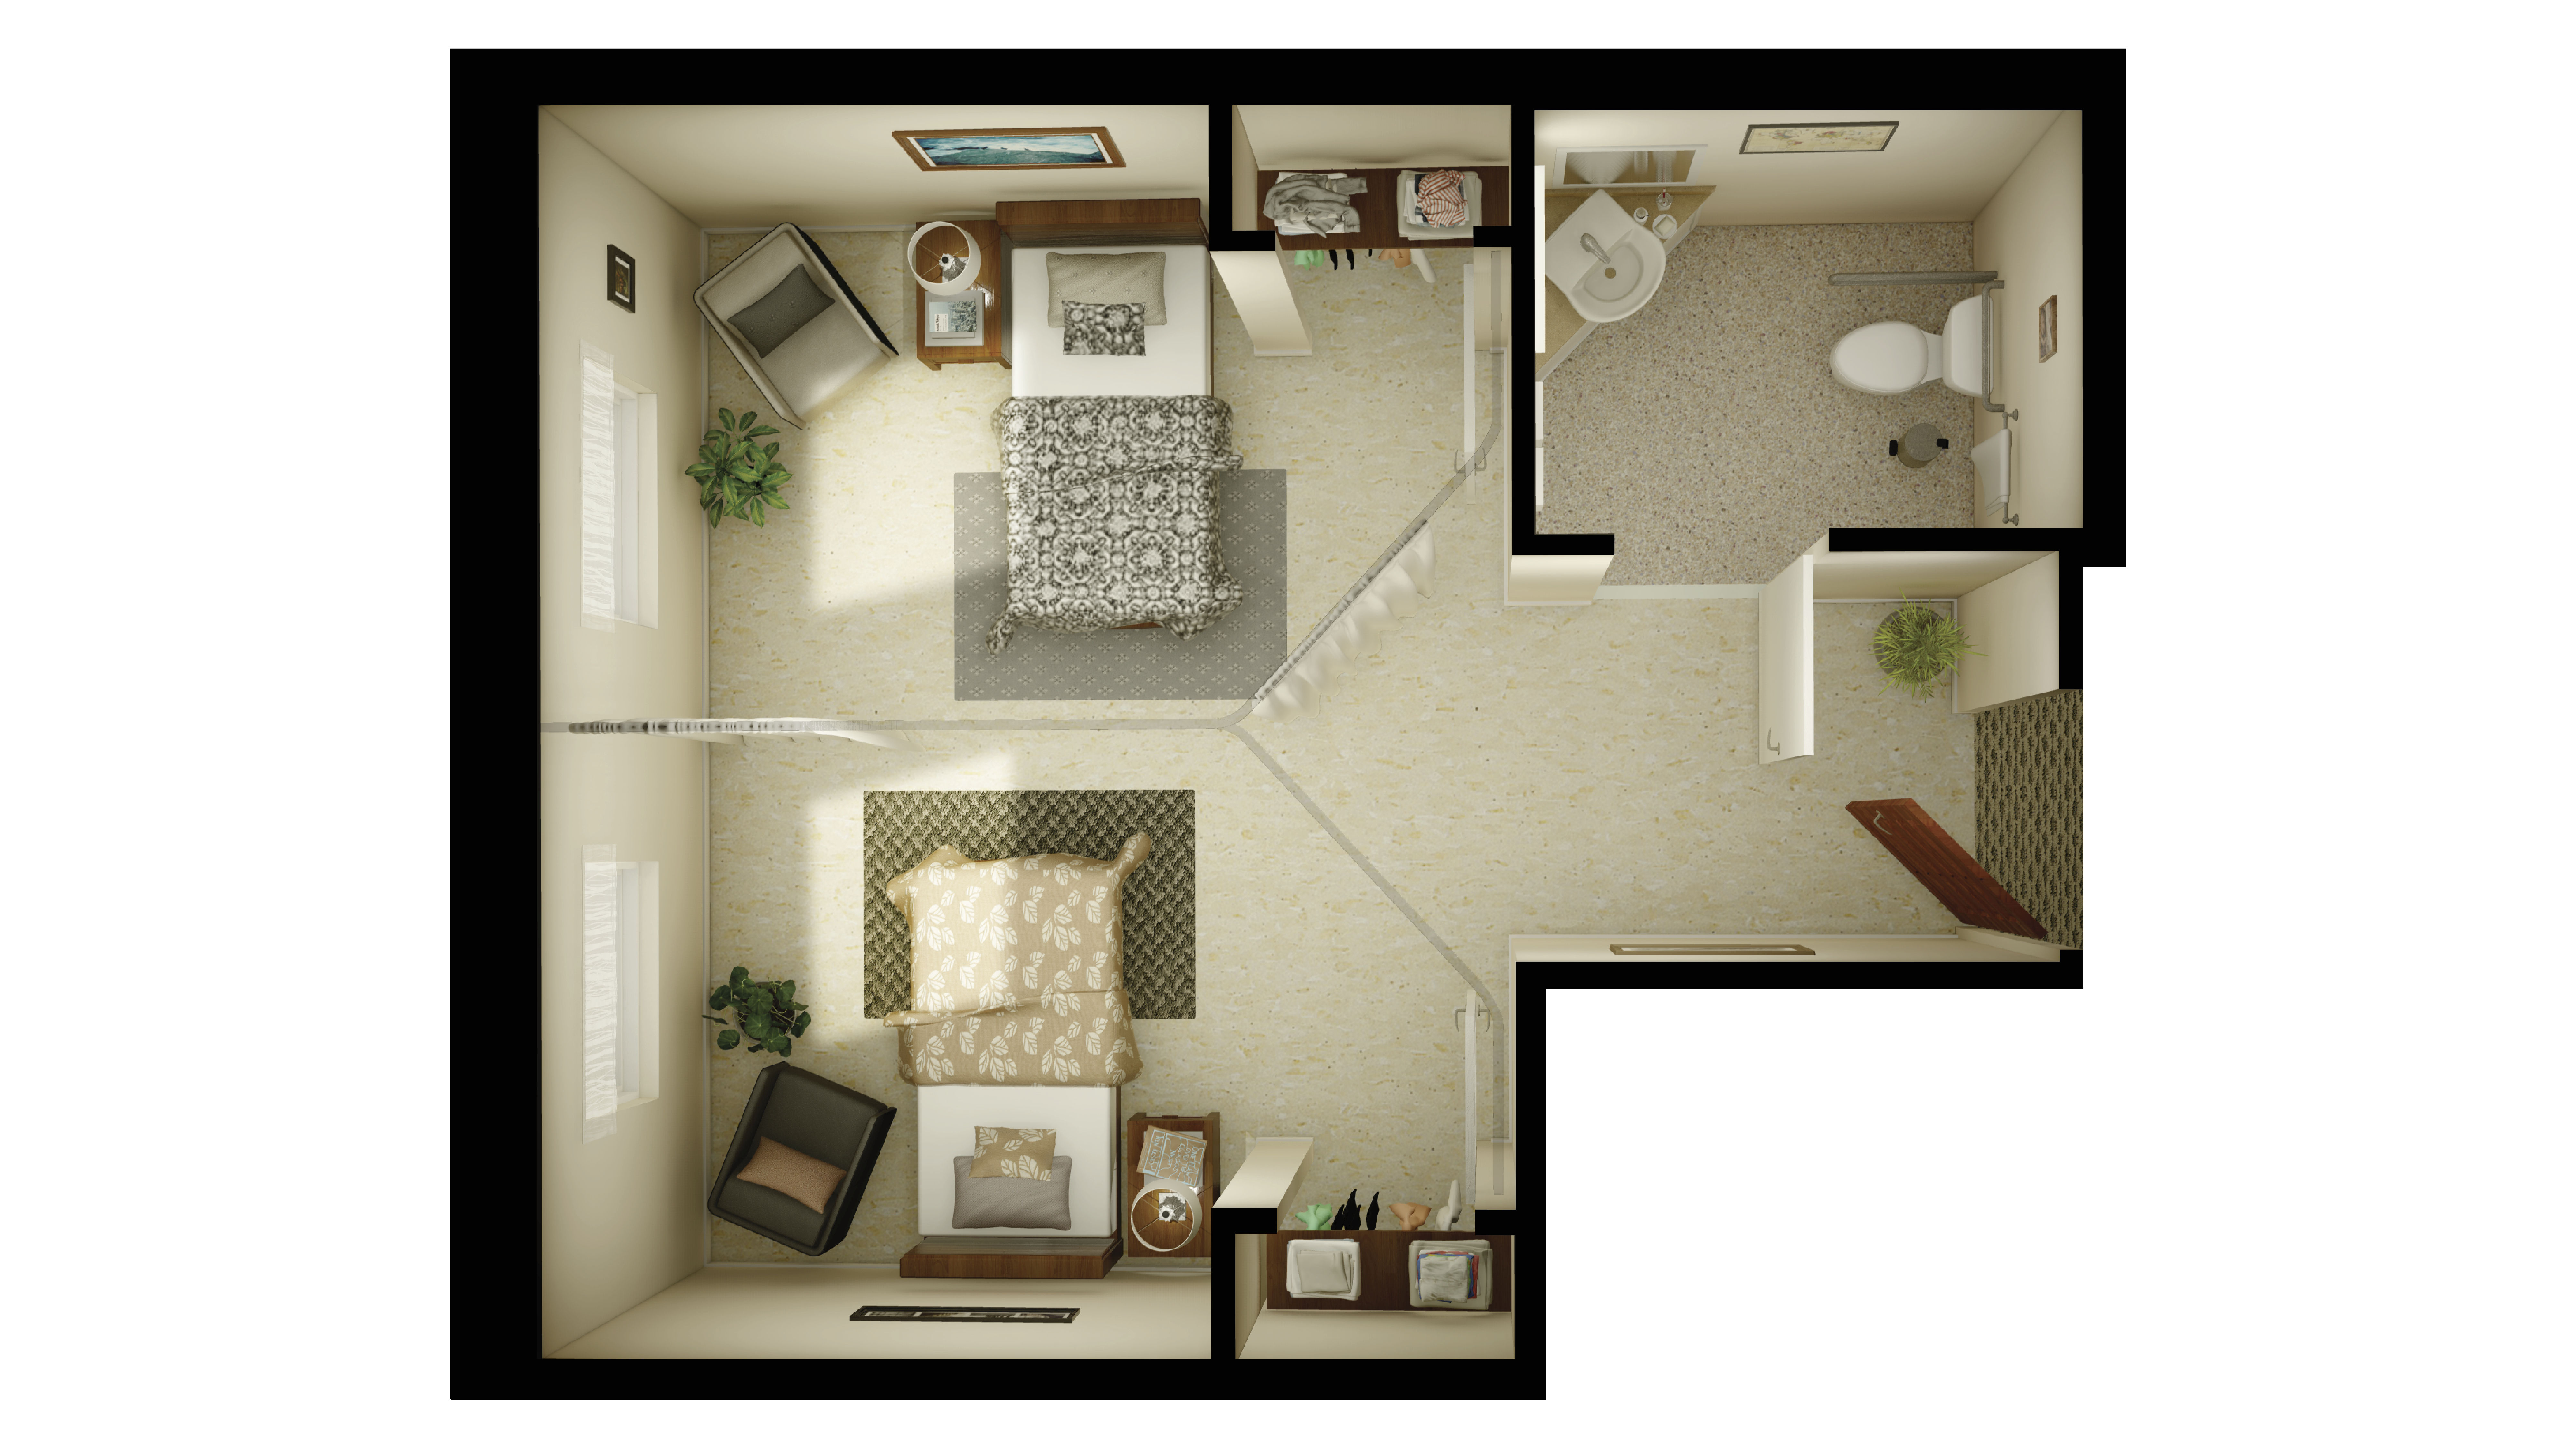 A sample floorplan of a standard suite in long-term care